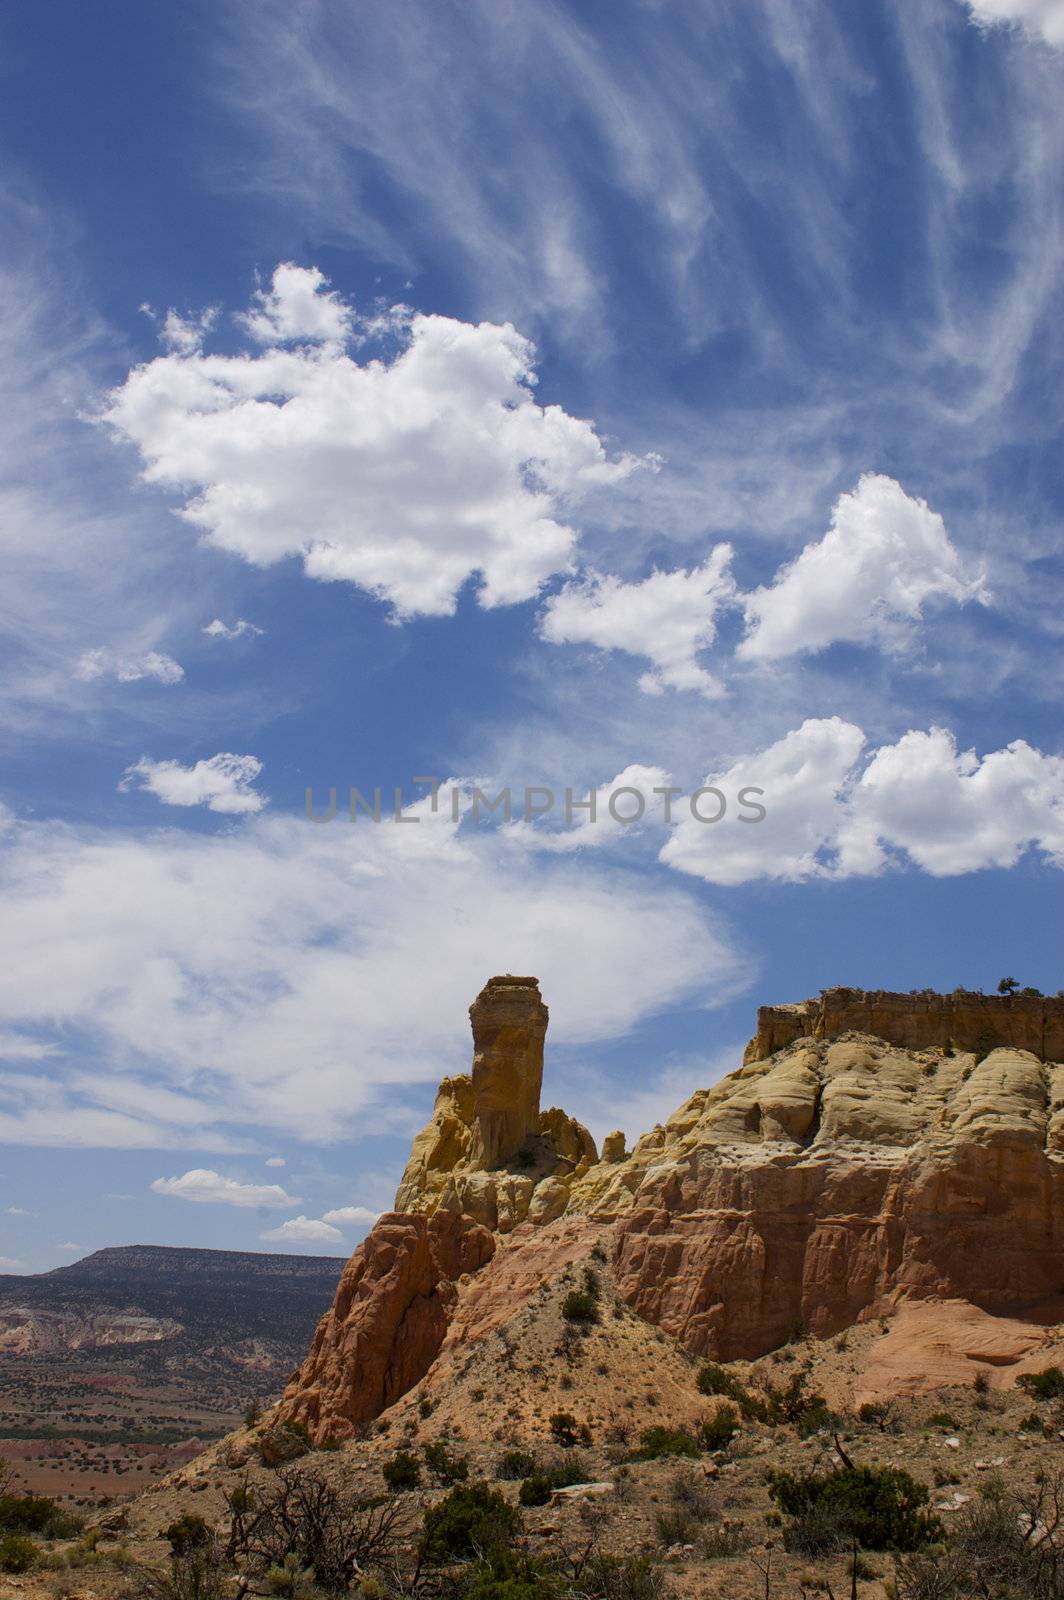 Featuring a rock formation at the red rock canyon/ mountain at Georgia O' Keefe's Ghost Ranch, New Mexico against a blue cloudy sky